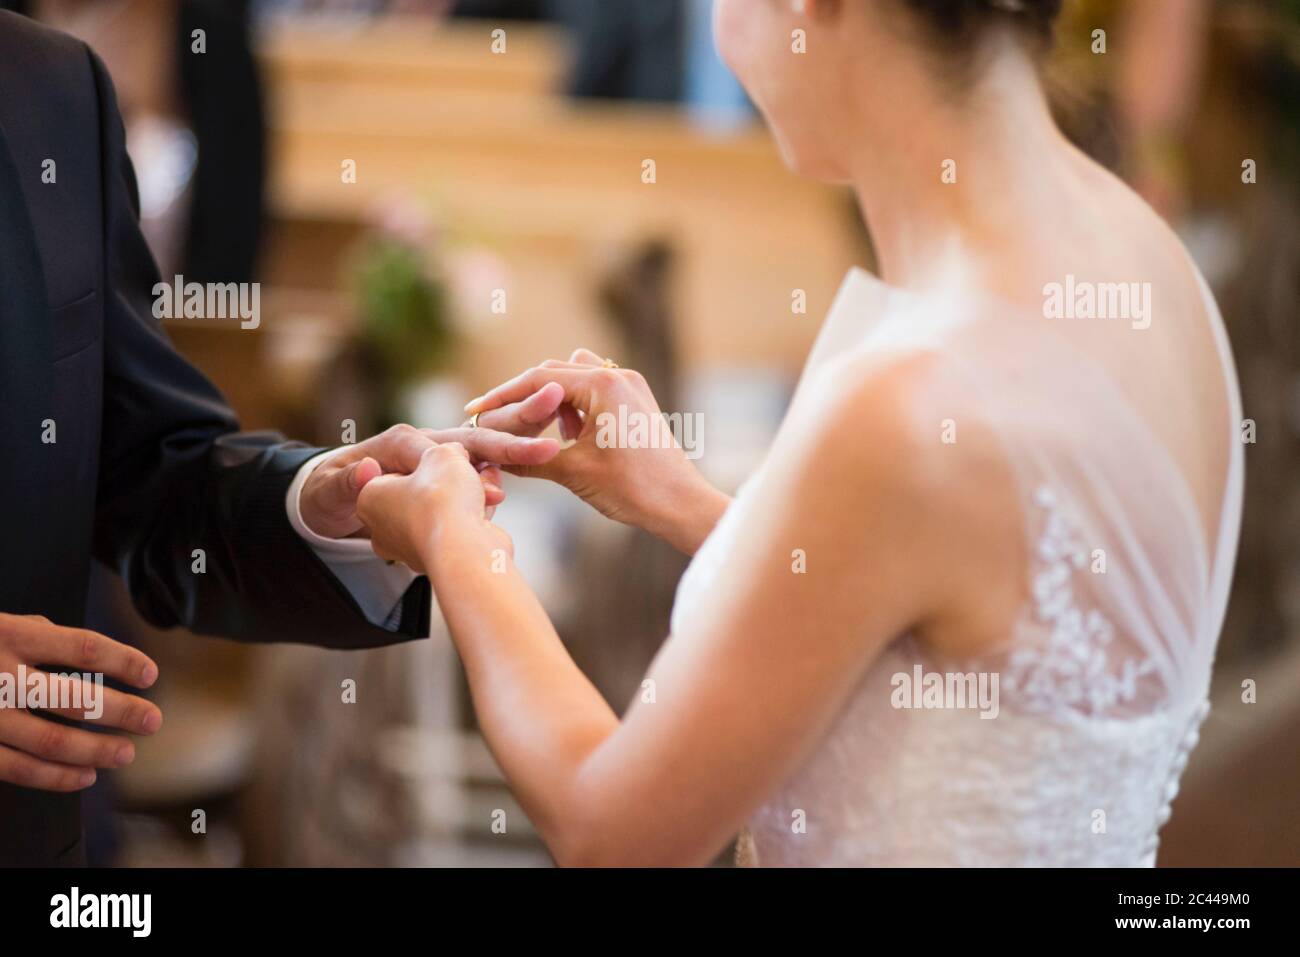 Bride wearing wedding ring to bridegroom while standing in church Stock Photo